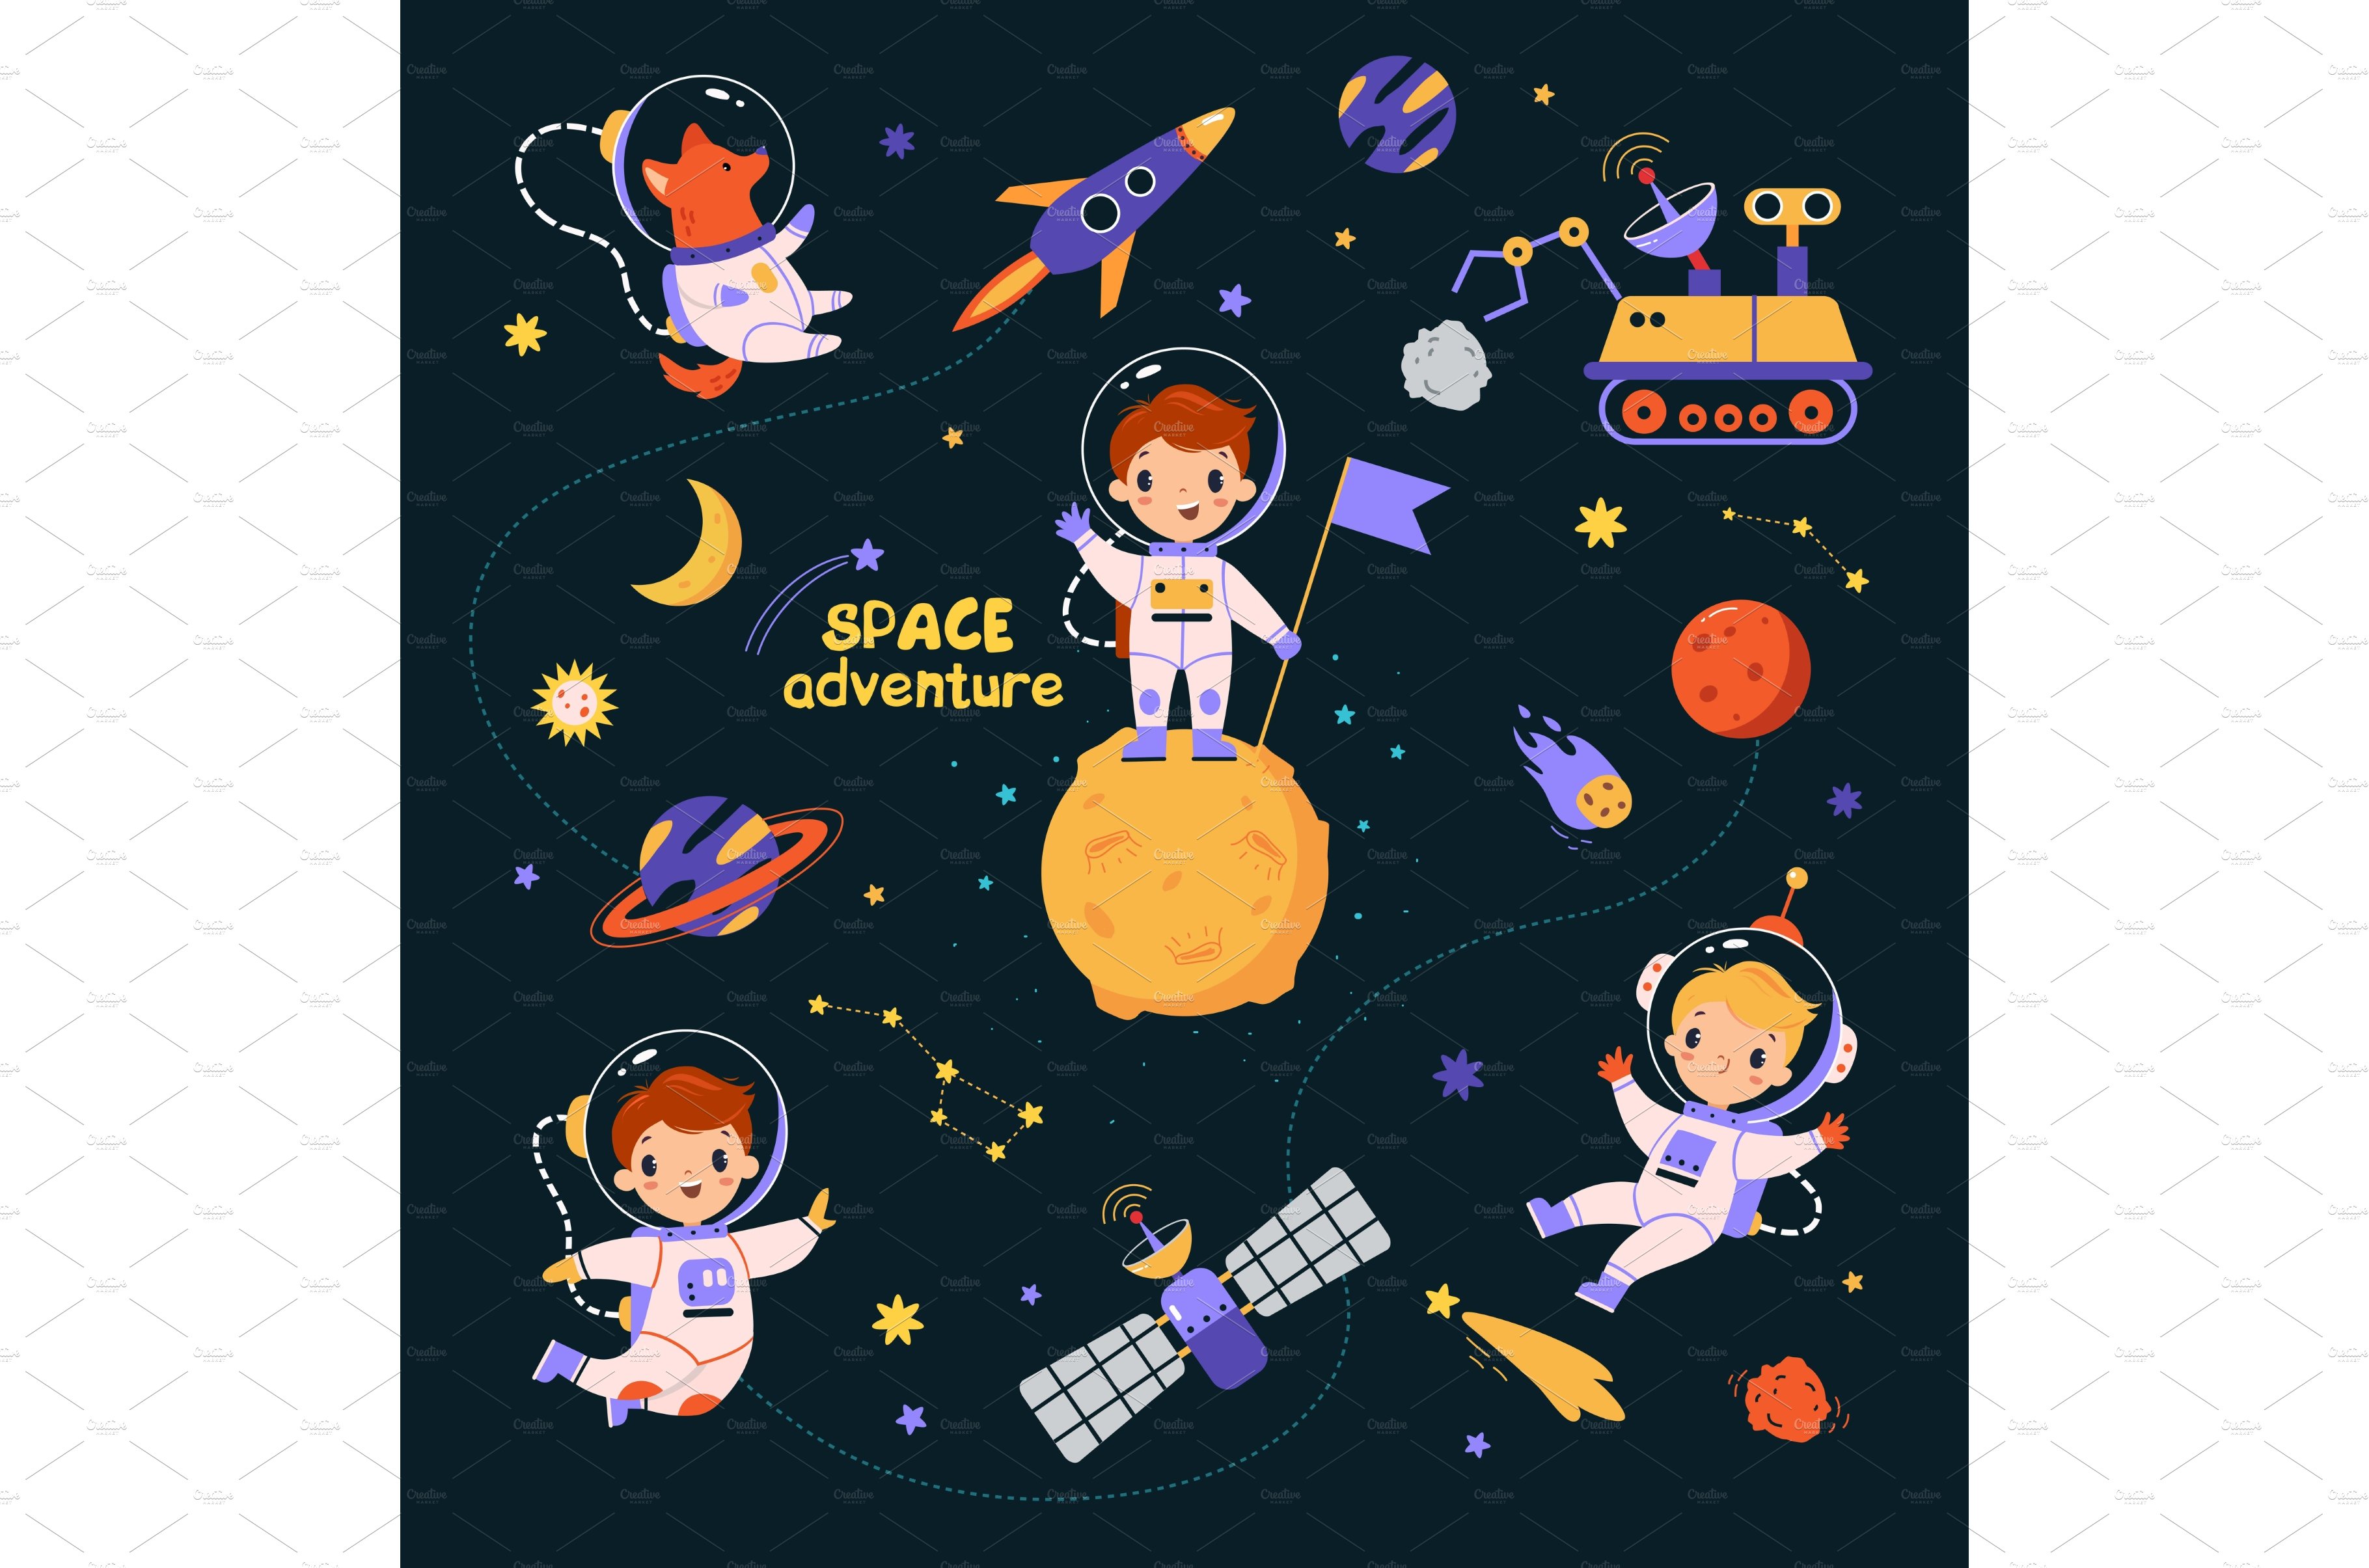 Space Adventure with Boy and Animal cover image.